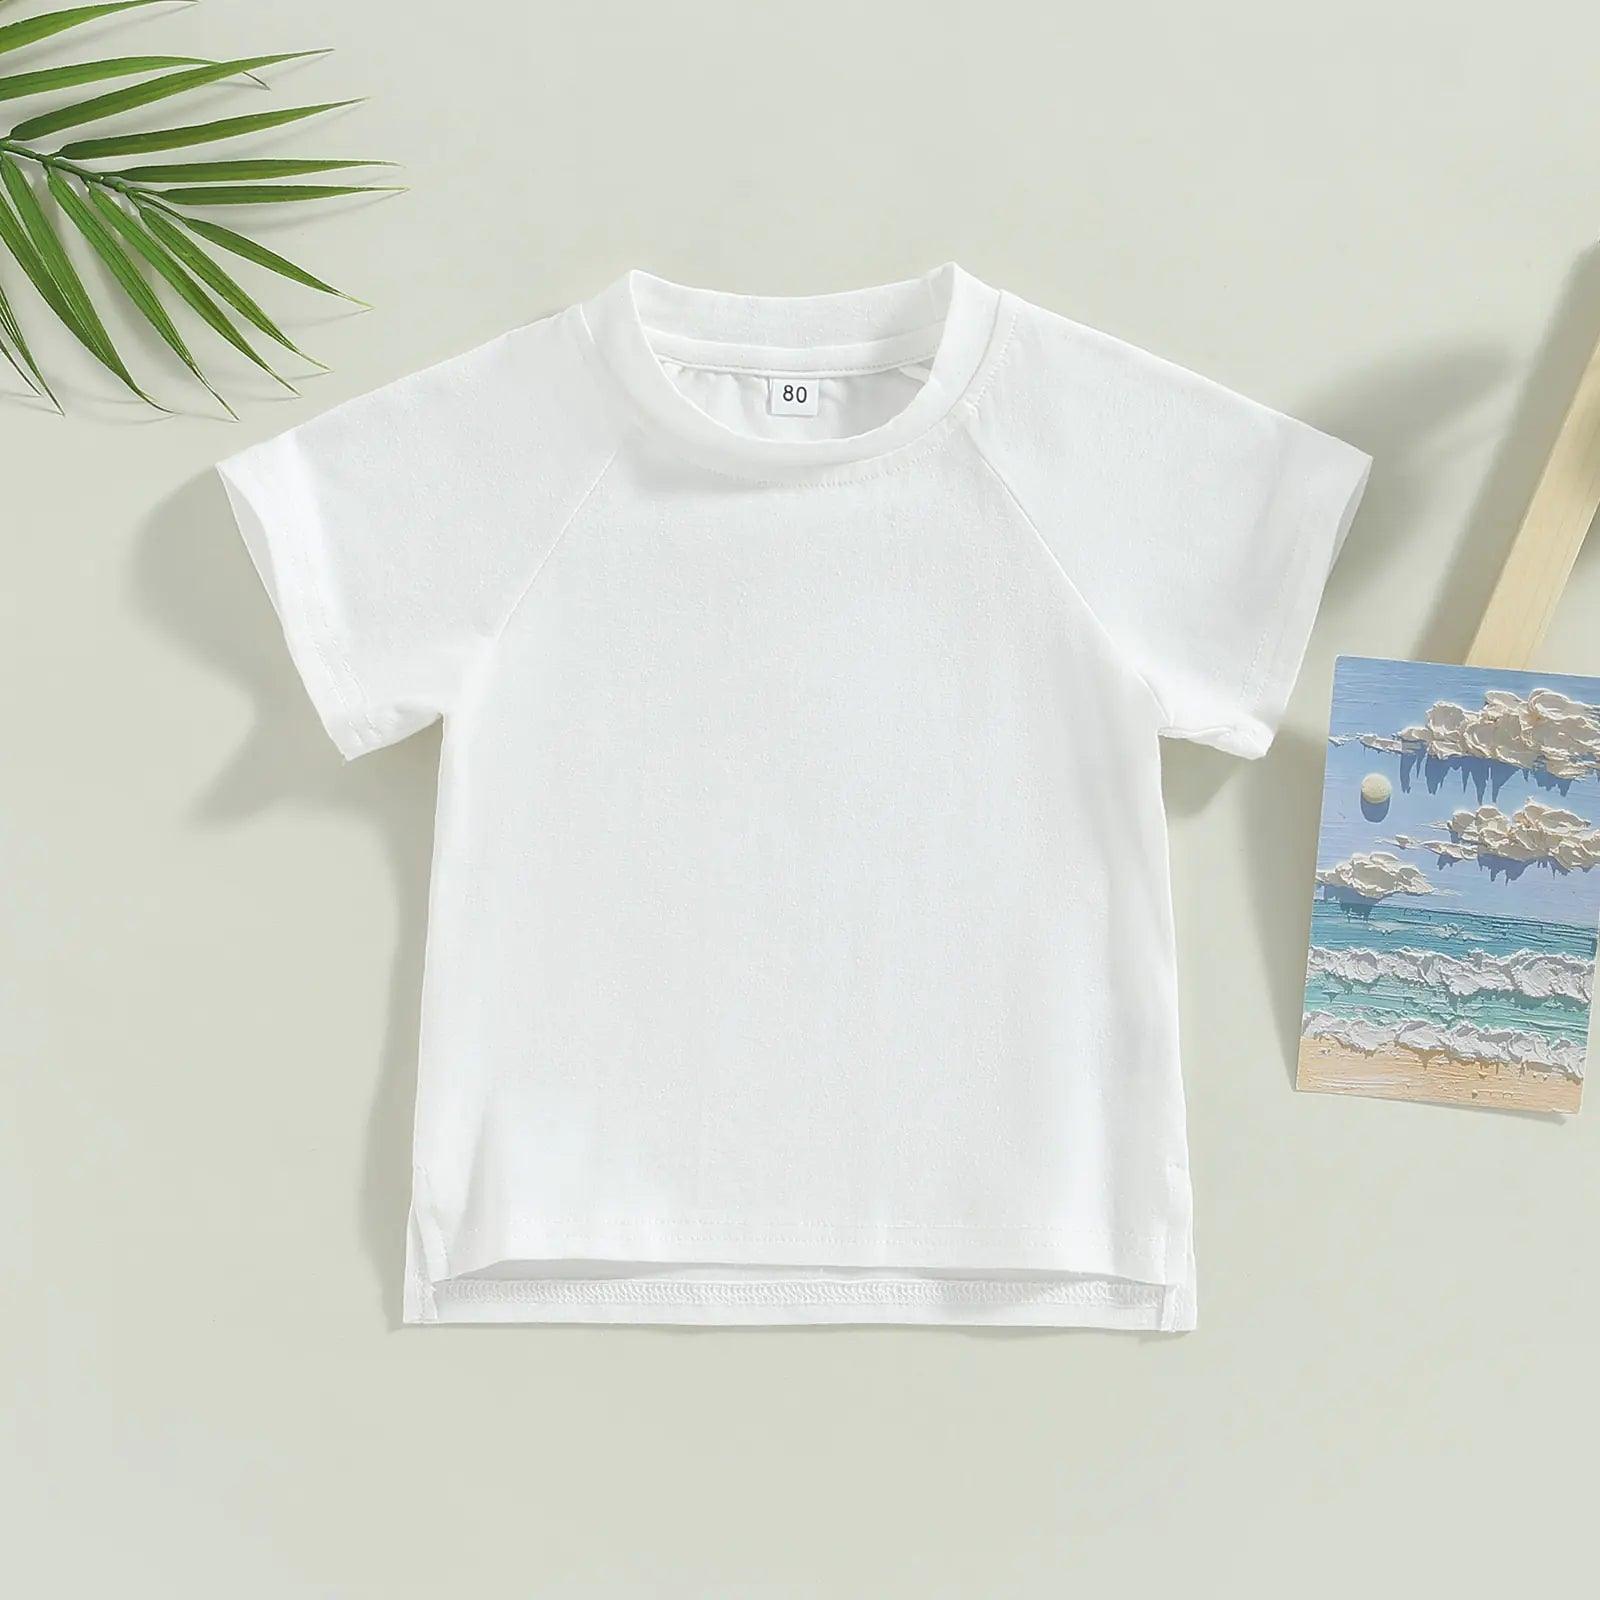 Toddler Kids Baby Girls Boys Summer Casual Tops - ACO Marketplace